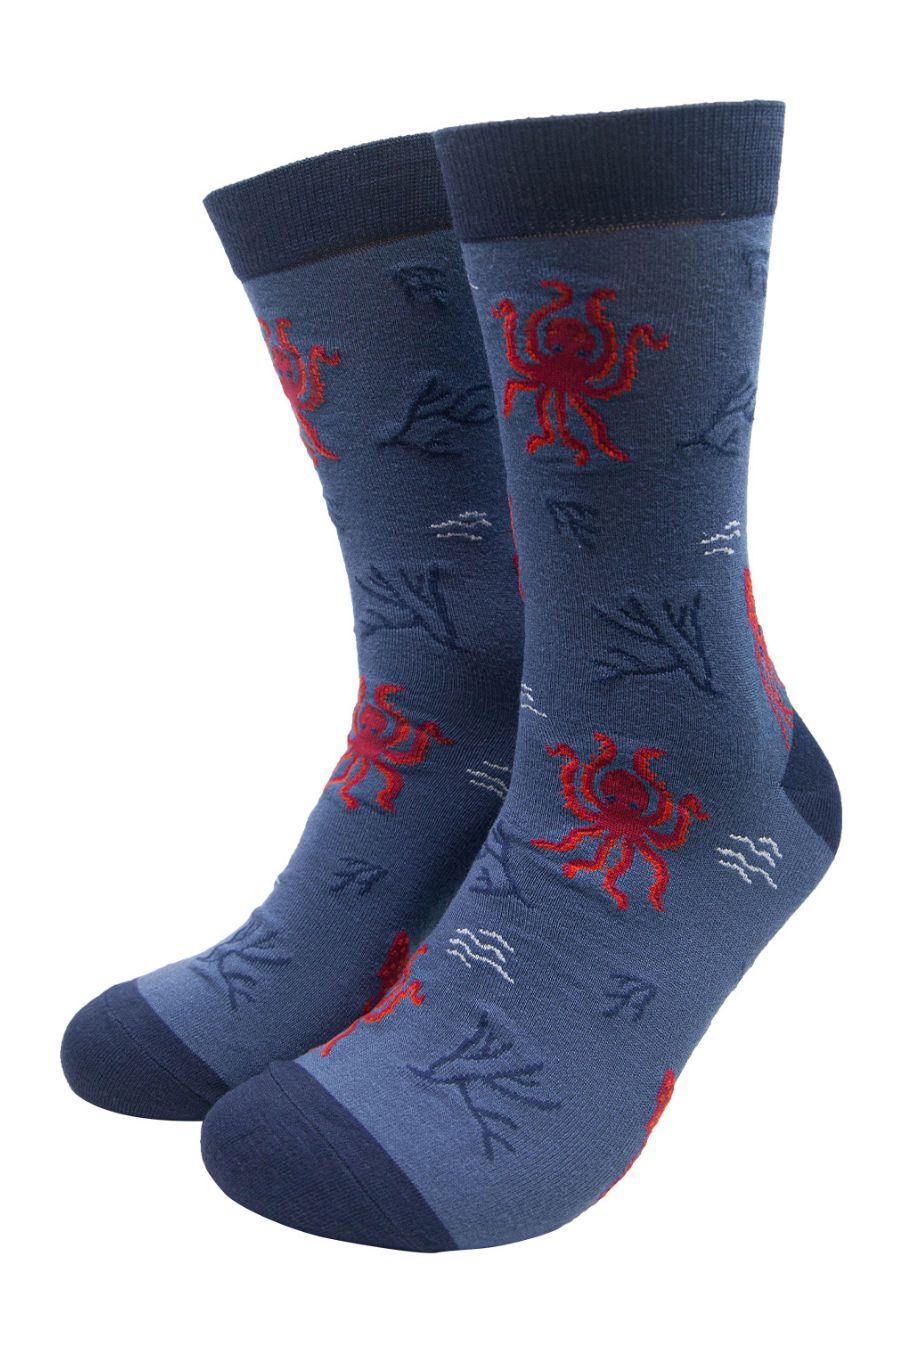 blue dress socks with red octopus on them